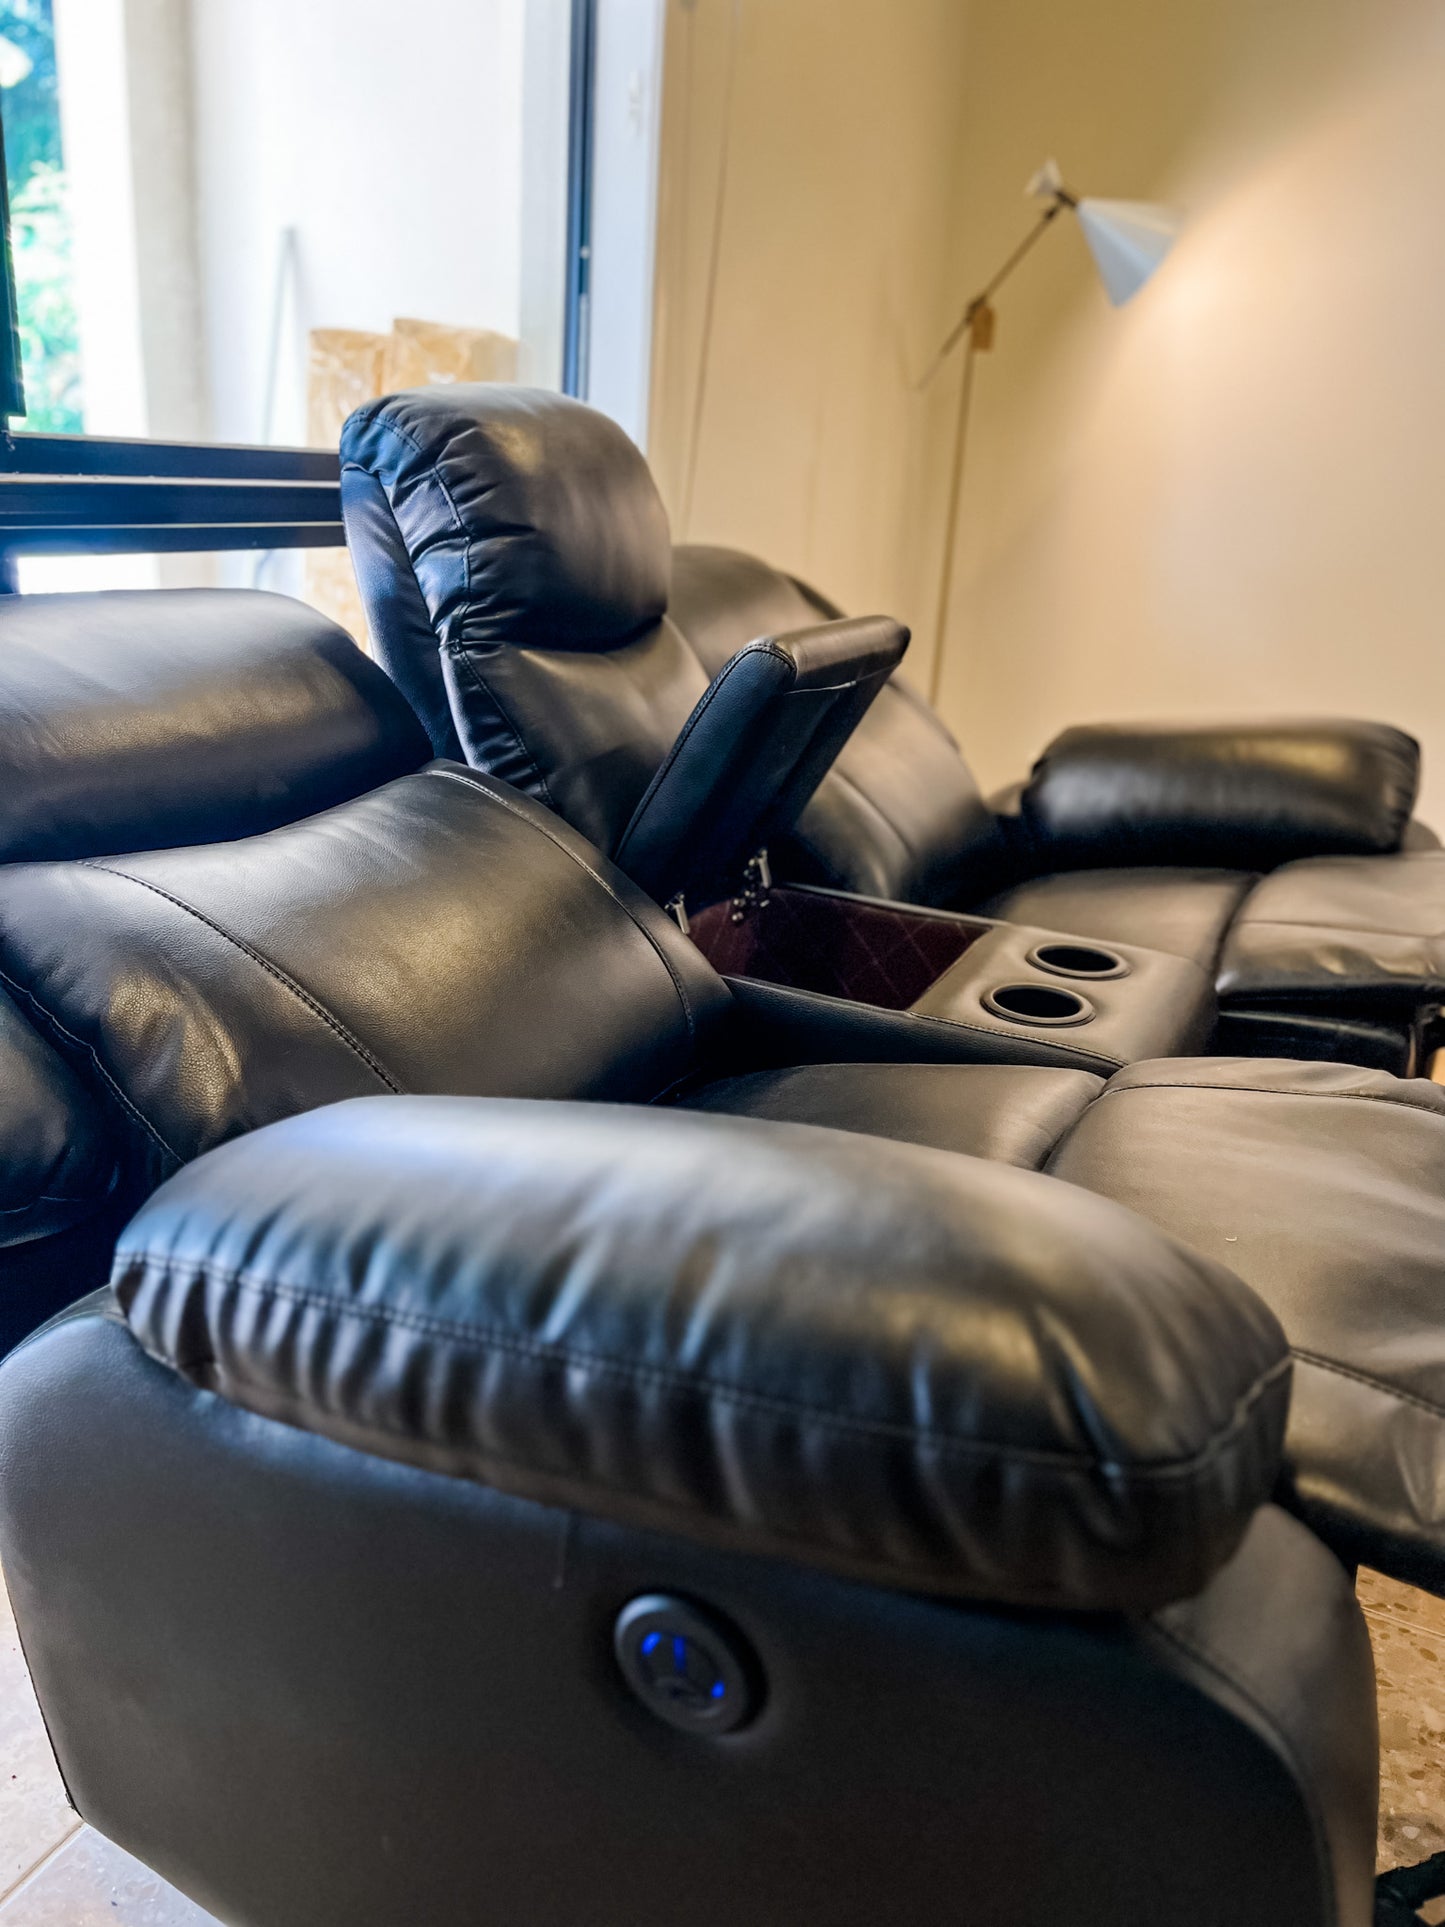 Cinema Couch - 3 Seater, 2 Seater Package Deal